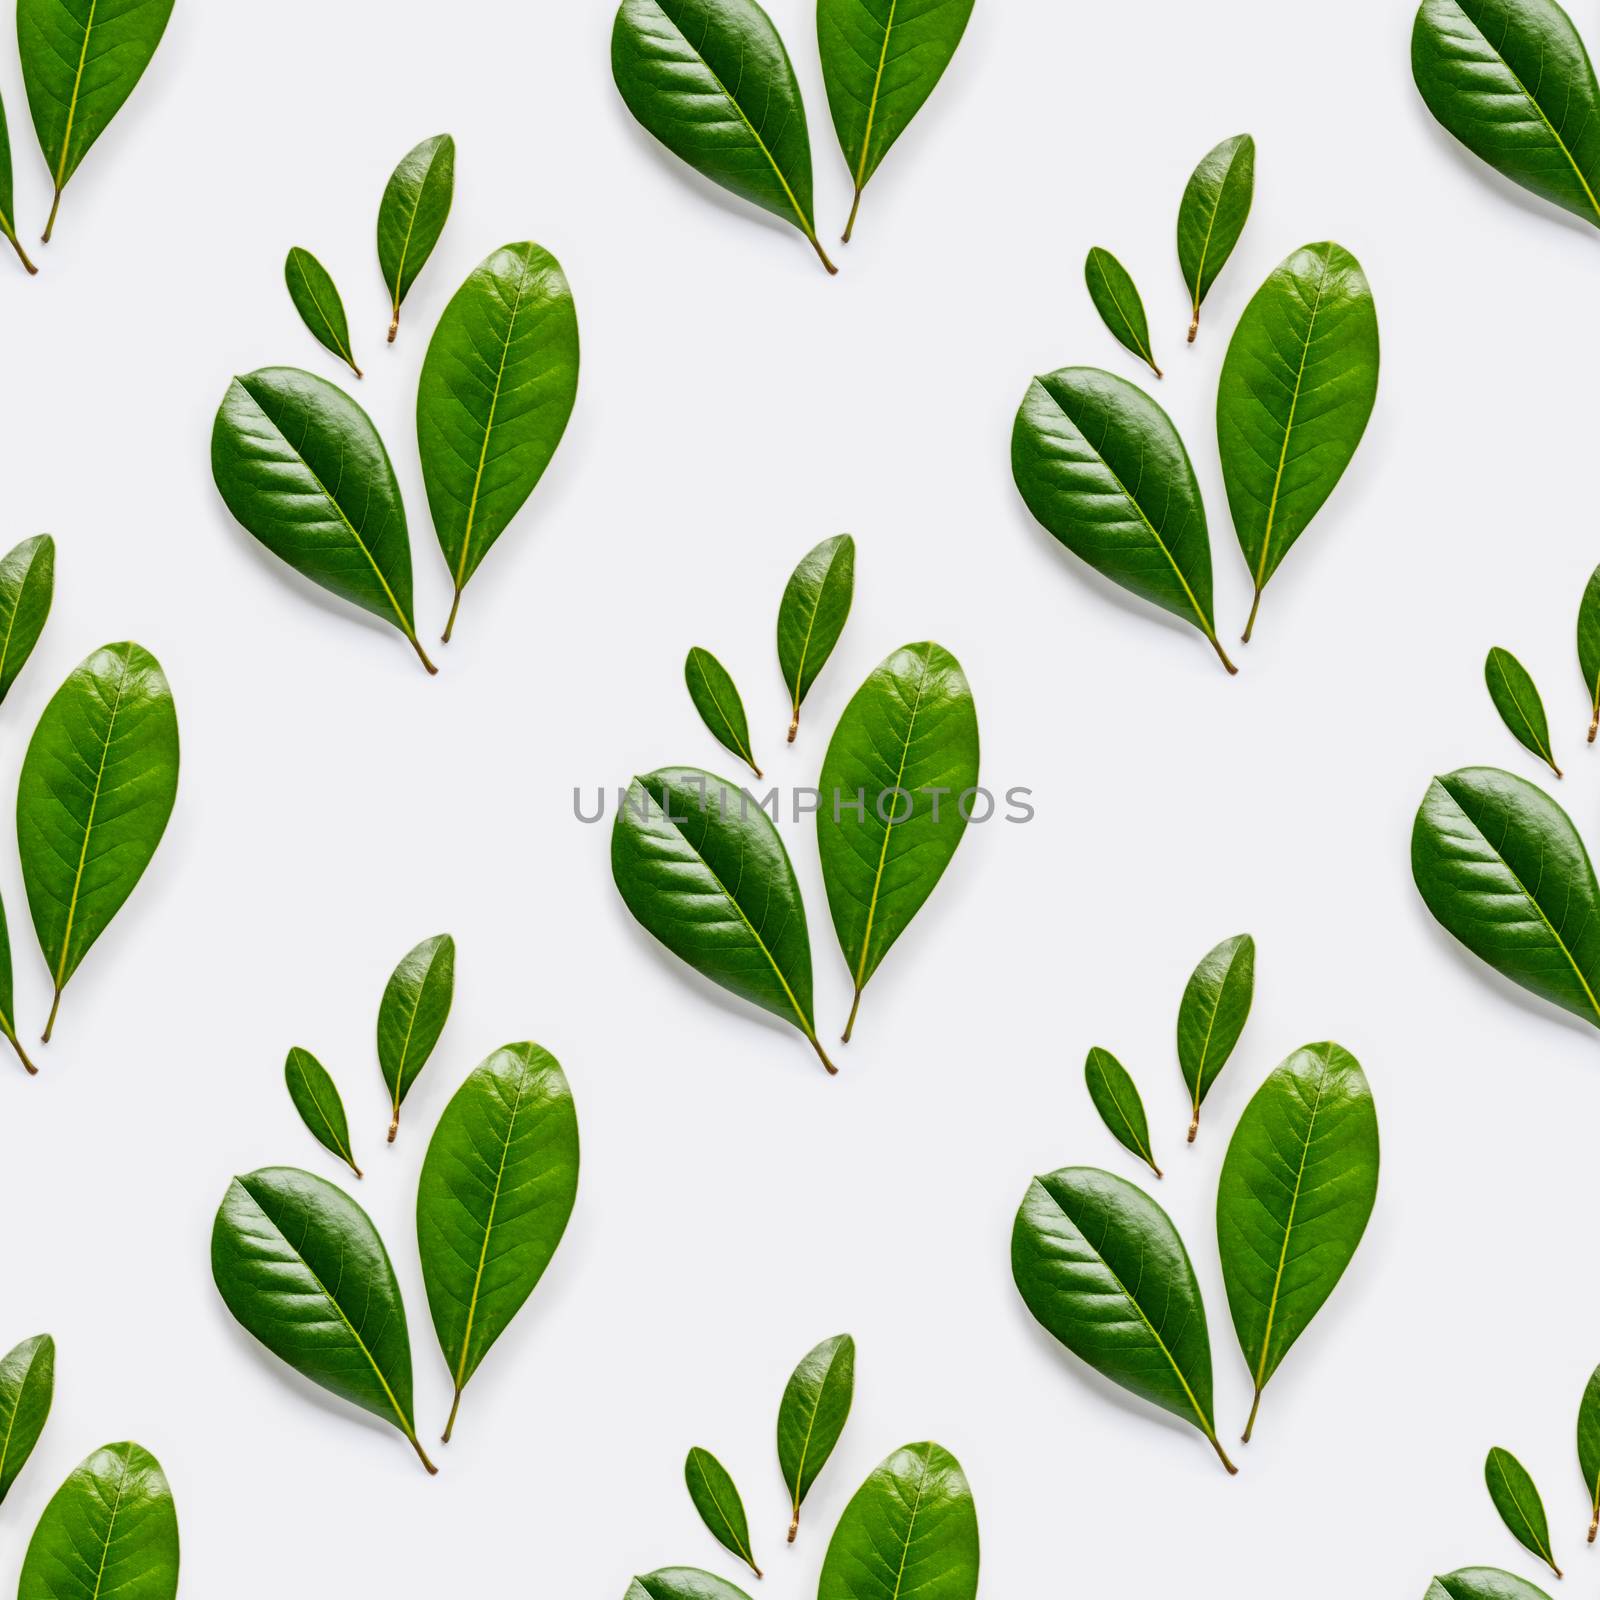 Seamless photo pattern with fresh green leaves on white background.